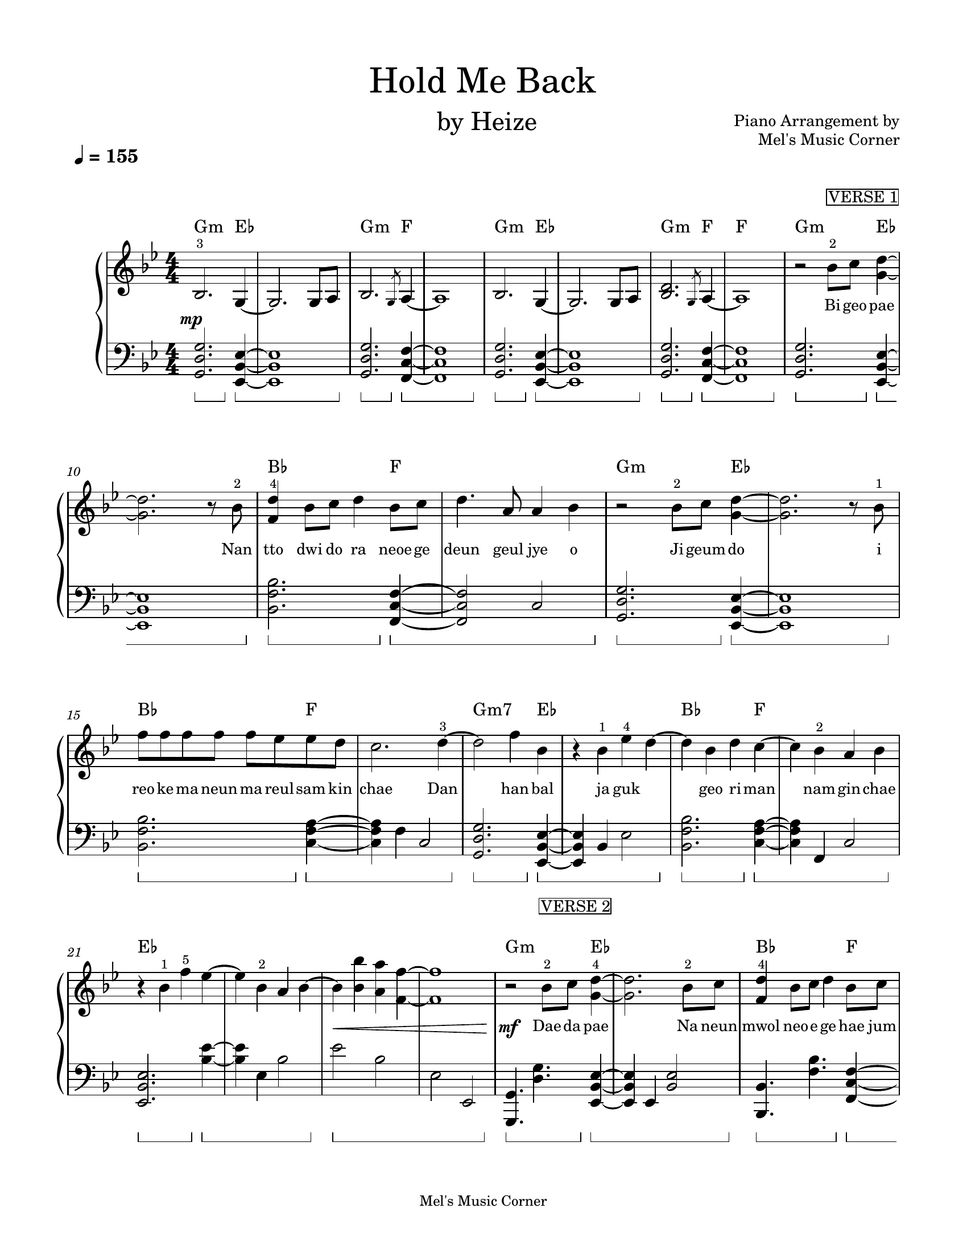 Heize - Hold Me Back (piano sheet music) by Mel's Music Corner